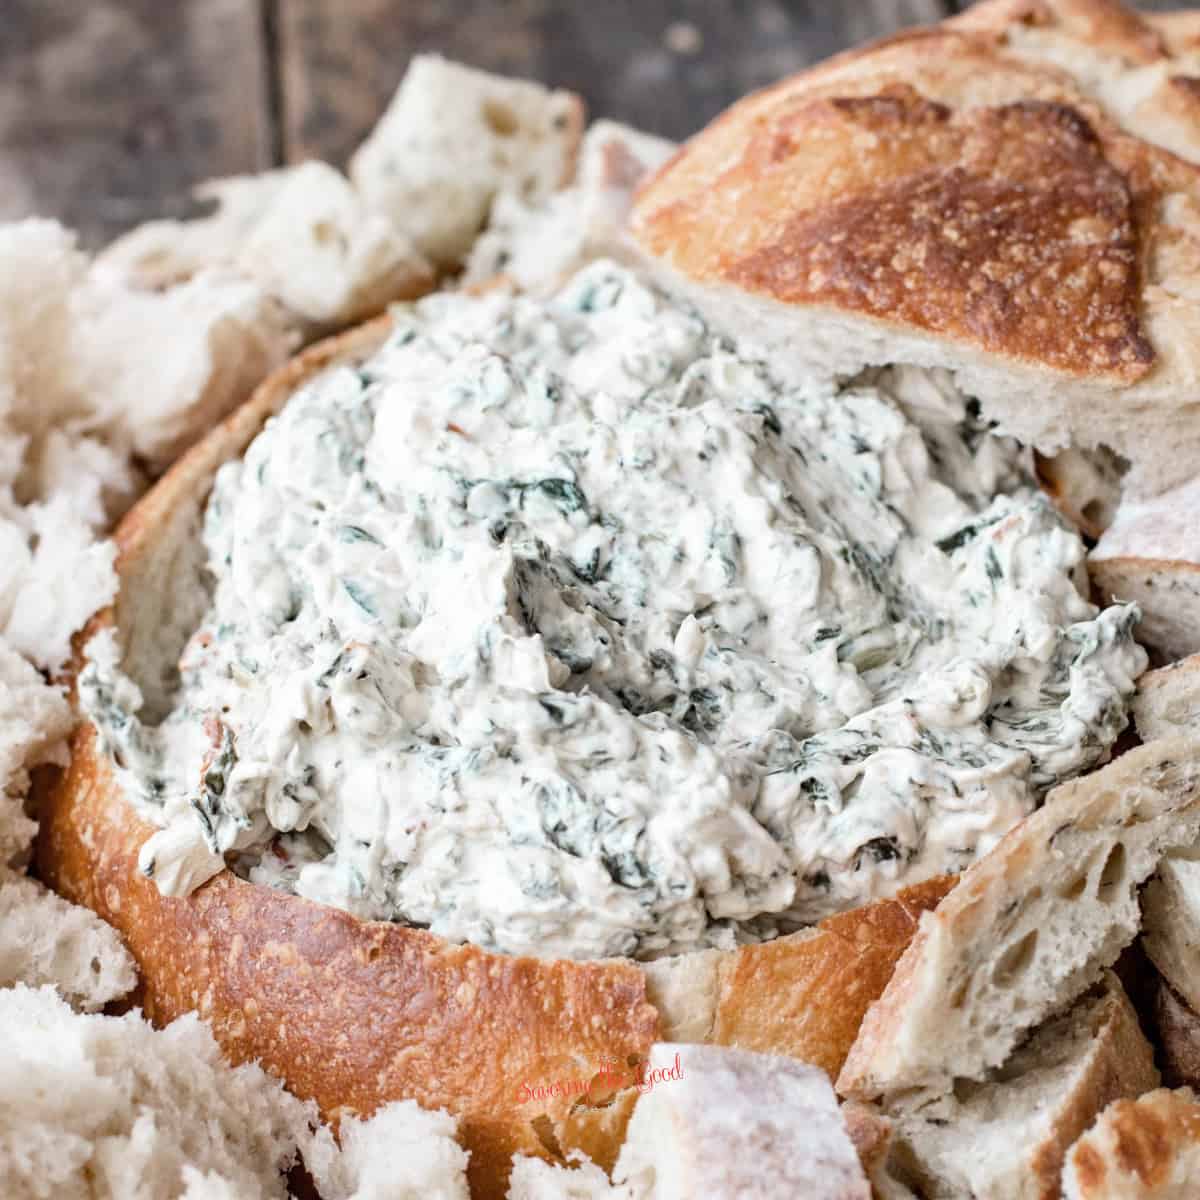 knorr spinach dip in a bread bowl.